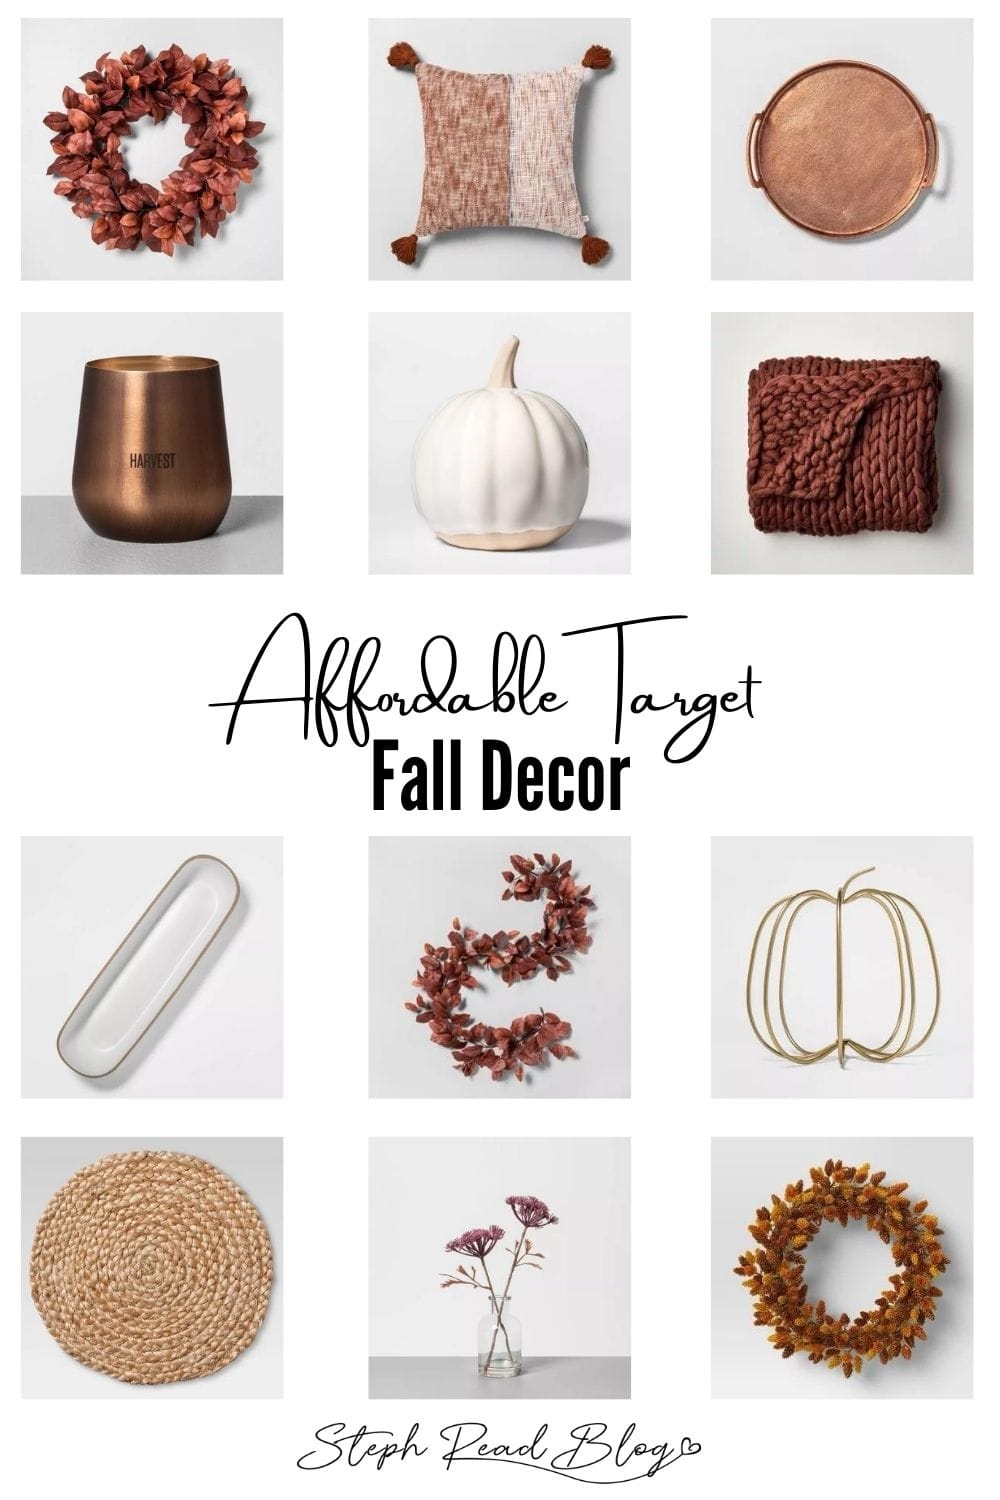 Affordable Fall Decor from Target